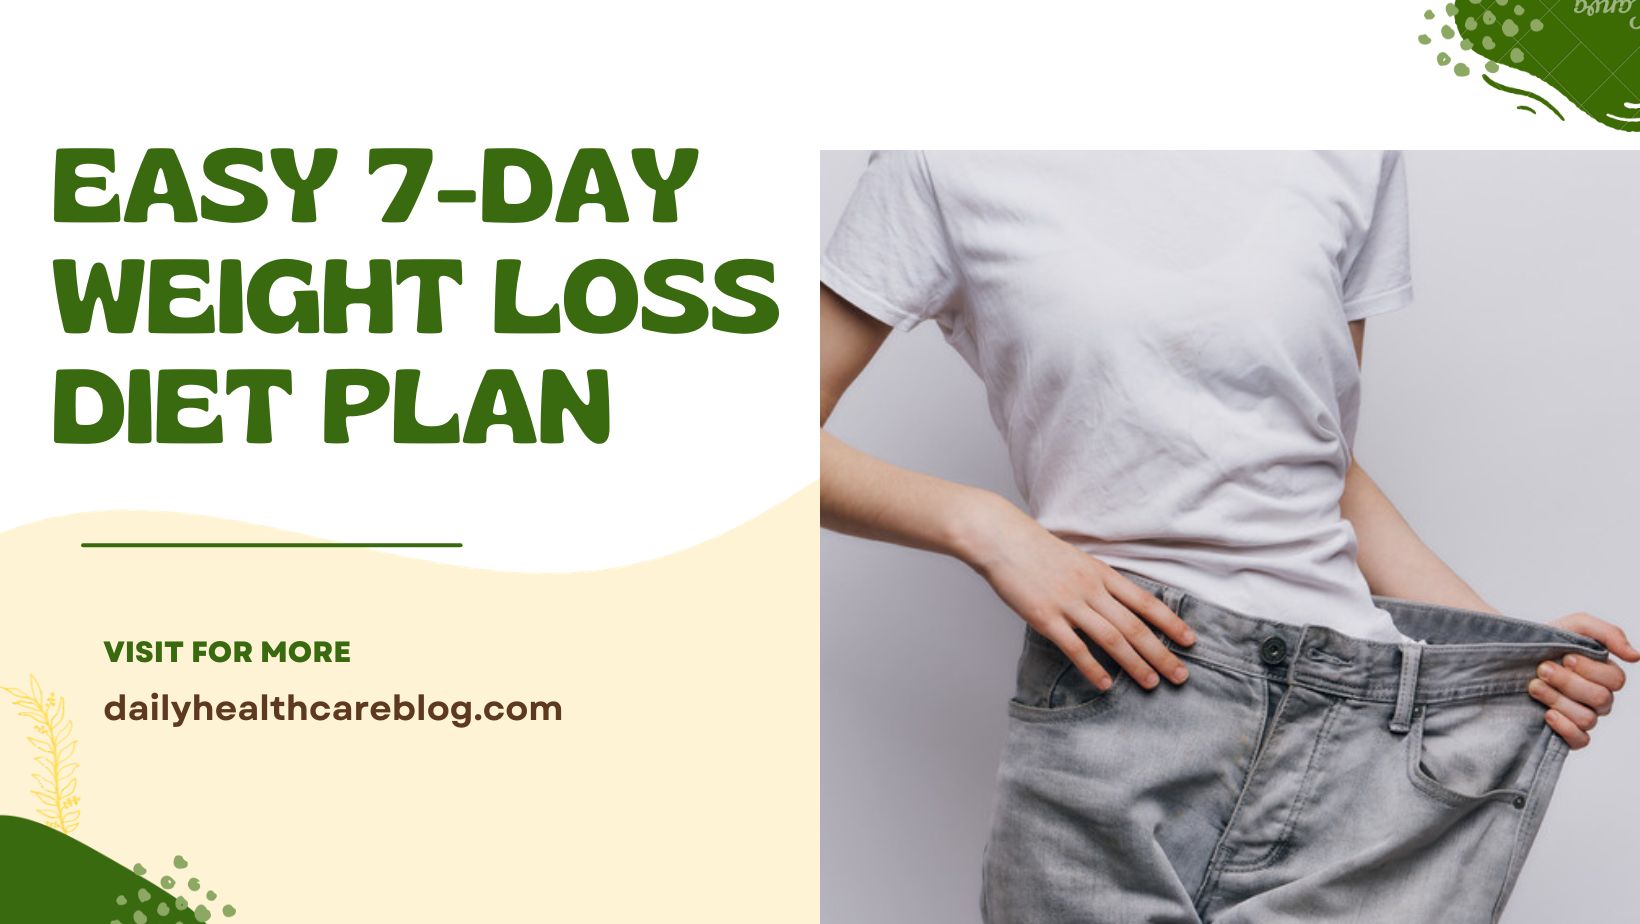 Easy 7-Day Weight Loss Diet Plan